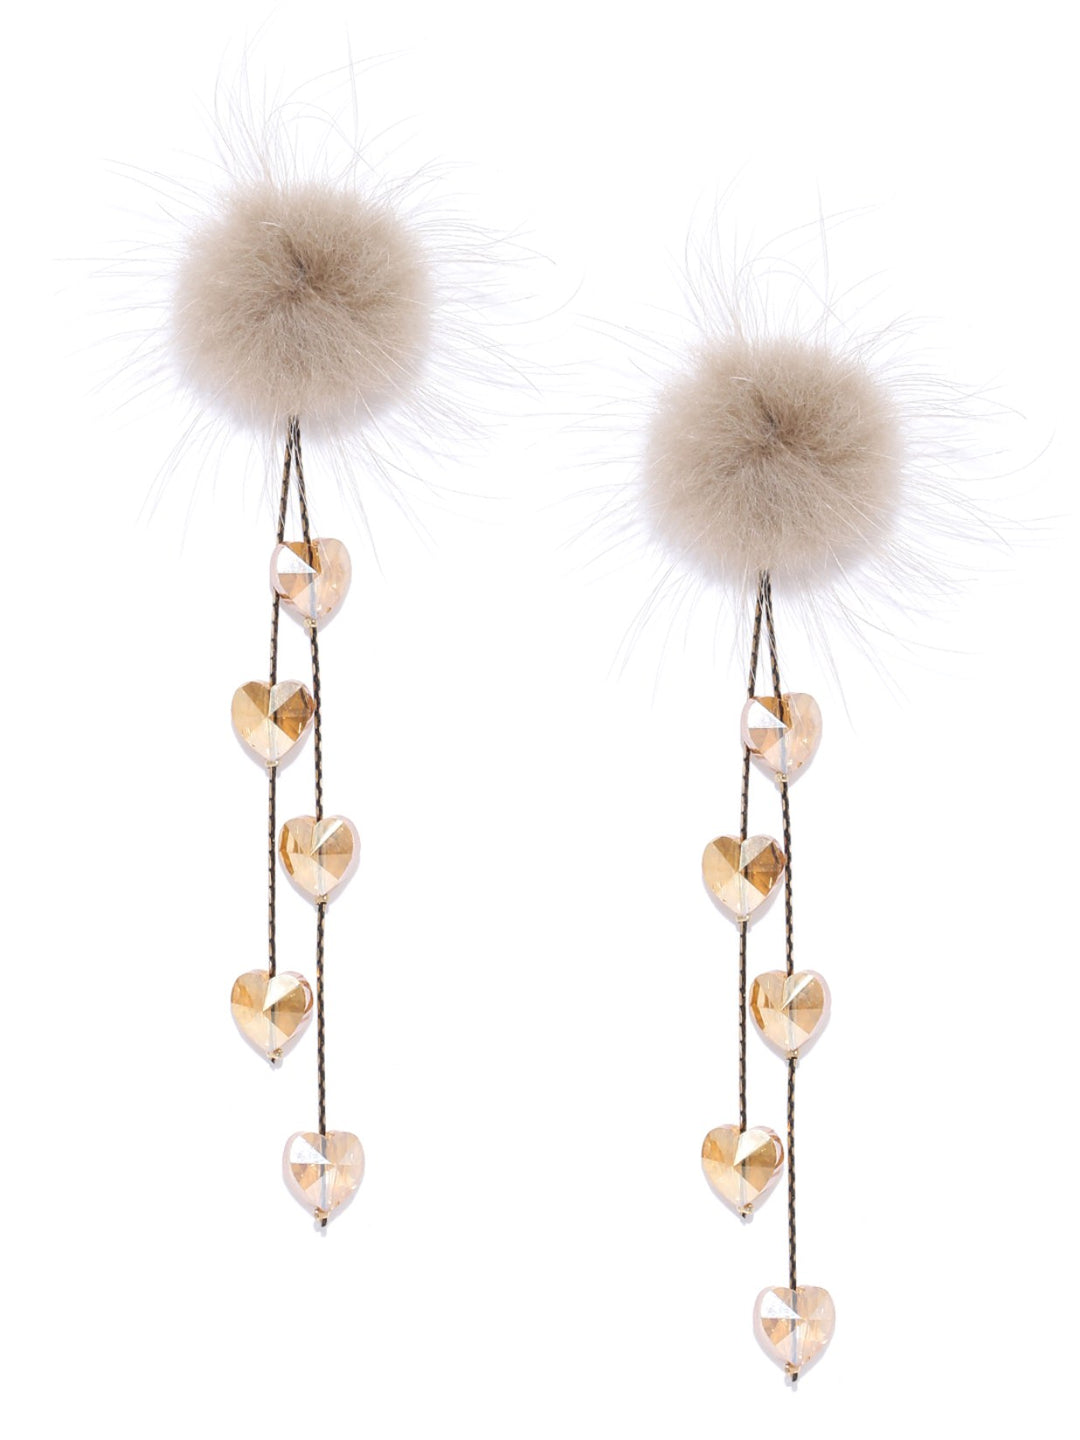 Designer Gold Plated Chain Hanging Heart Shape Stones With Fur Stylish S Andstone Color Drop Earrings For Women And Girls